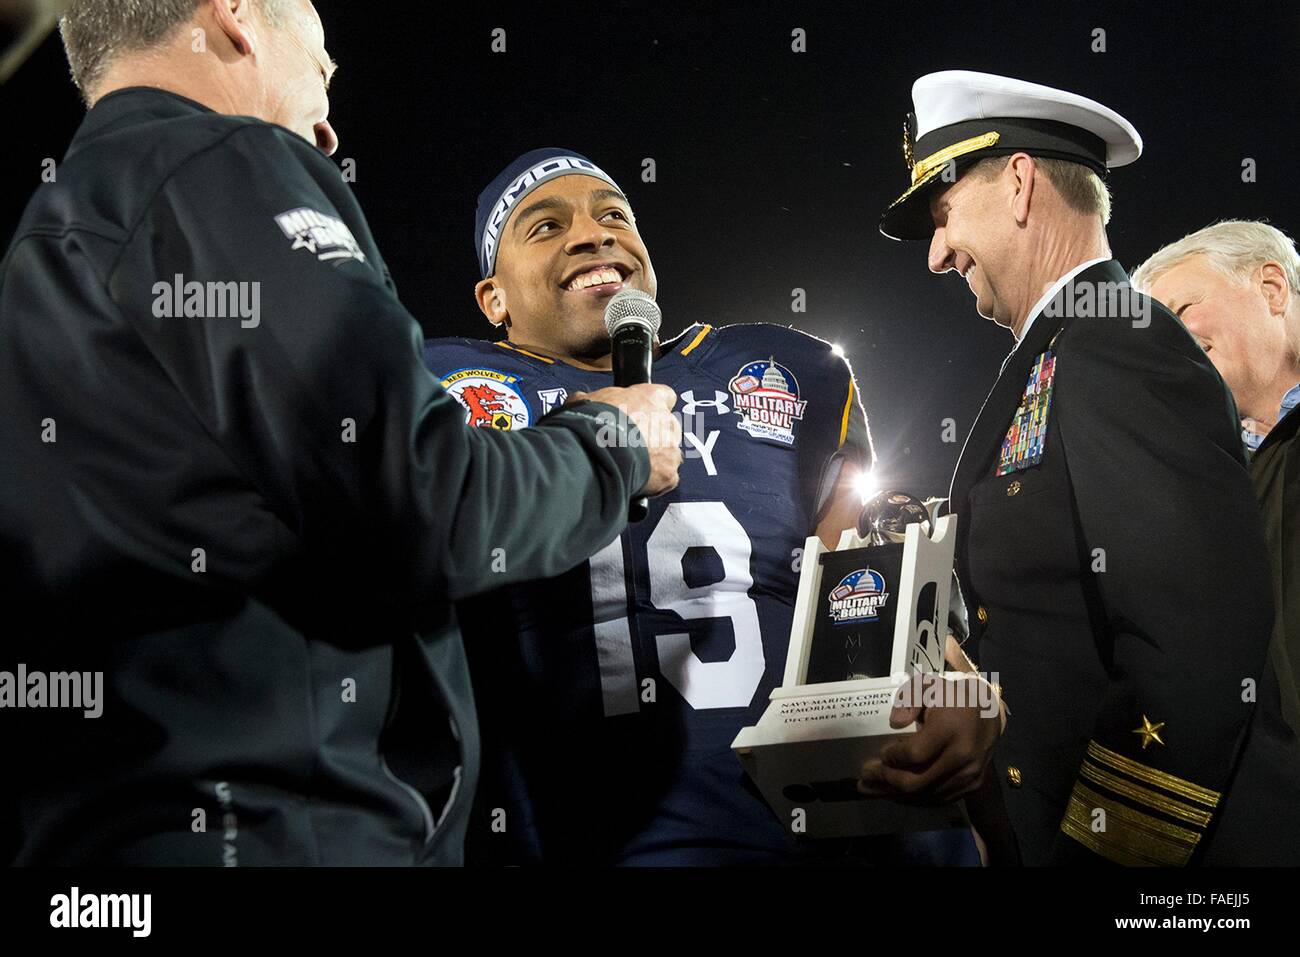 Annapolis, Maryland, USA. 28th Dec, 2015. U.S. Naval Academy quarterback Keenan Reynolds (19) accepts the Most Valuable Player trophy for Navy's 44-28 victory over Pittsburgh in the 2015 Military Bowl at Navy-Marine Corps Stadium December 28, 2015 in Annapolis, Maryland. Reynolds broke the NCAA Football Subdivision record for touchdowns with 88 and also set the career rushing yards with 4,559 yards. Stock Photo